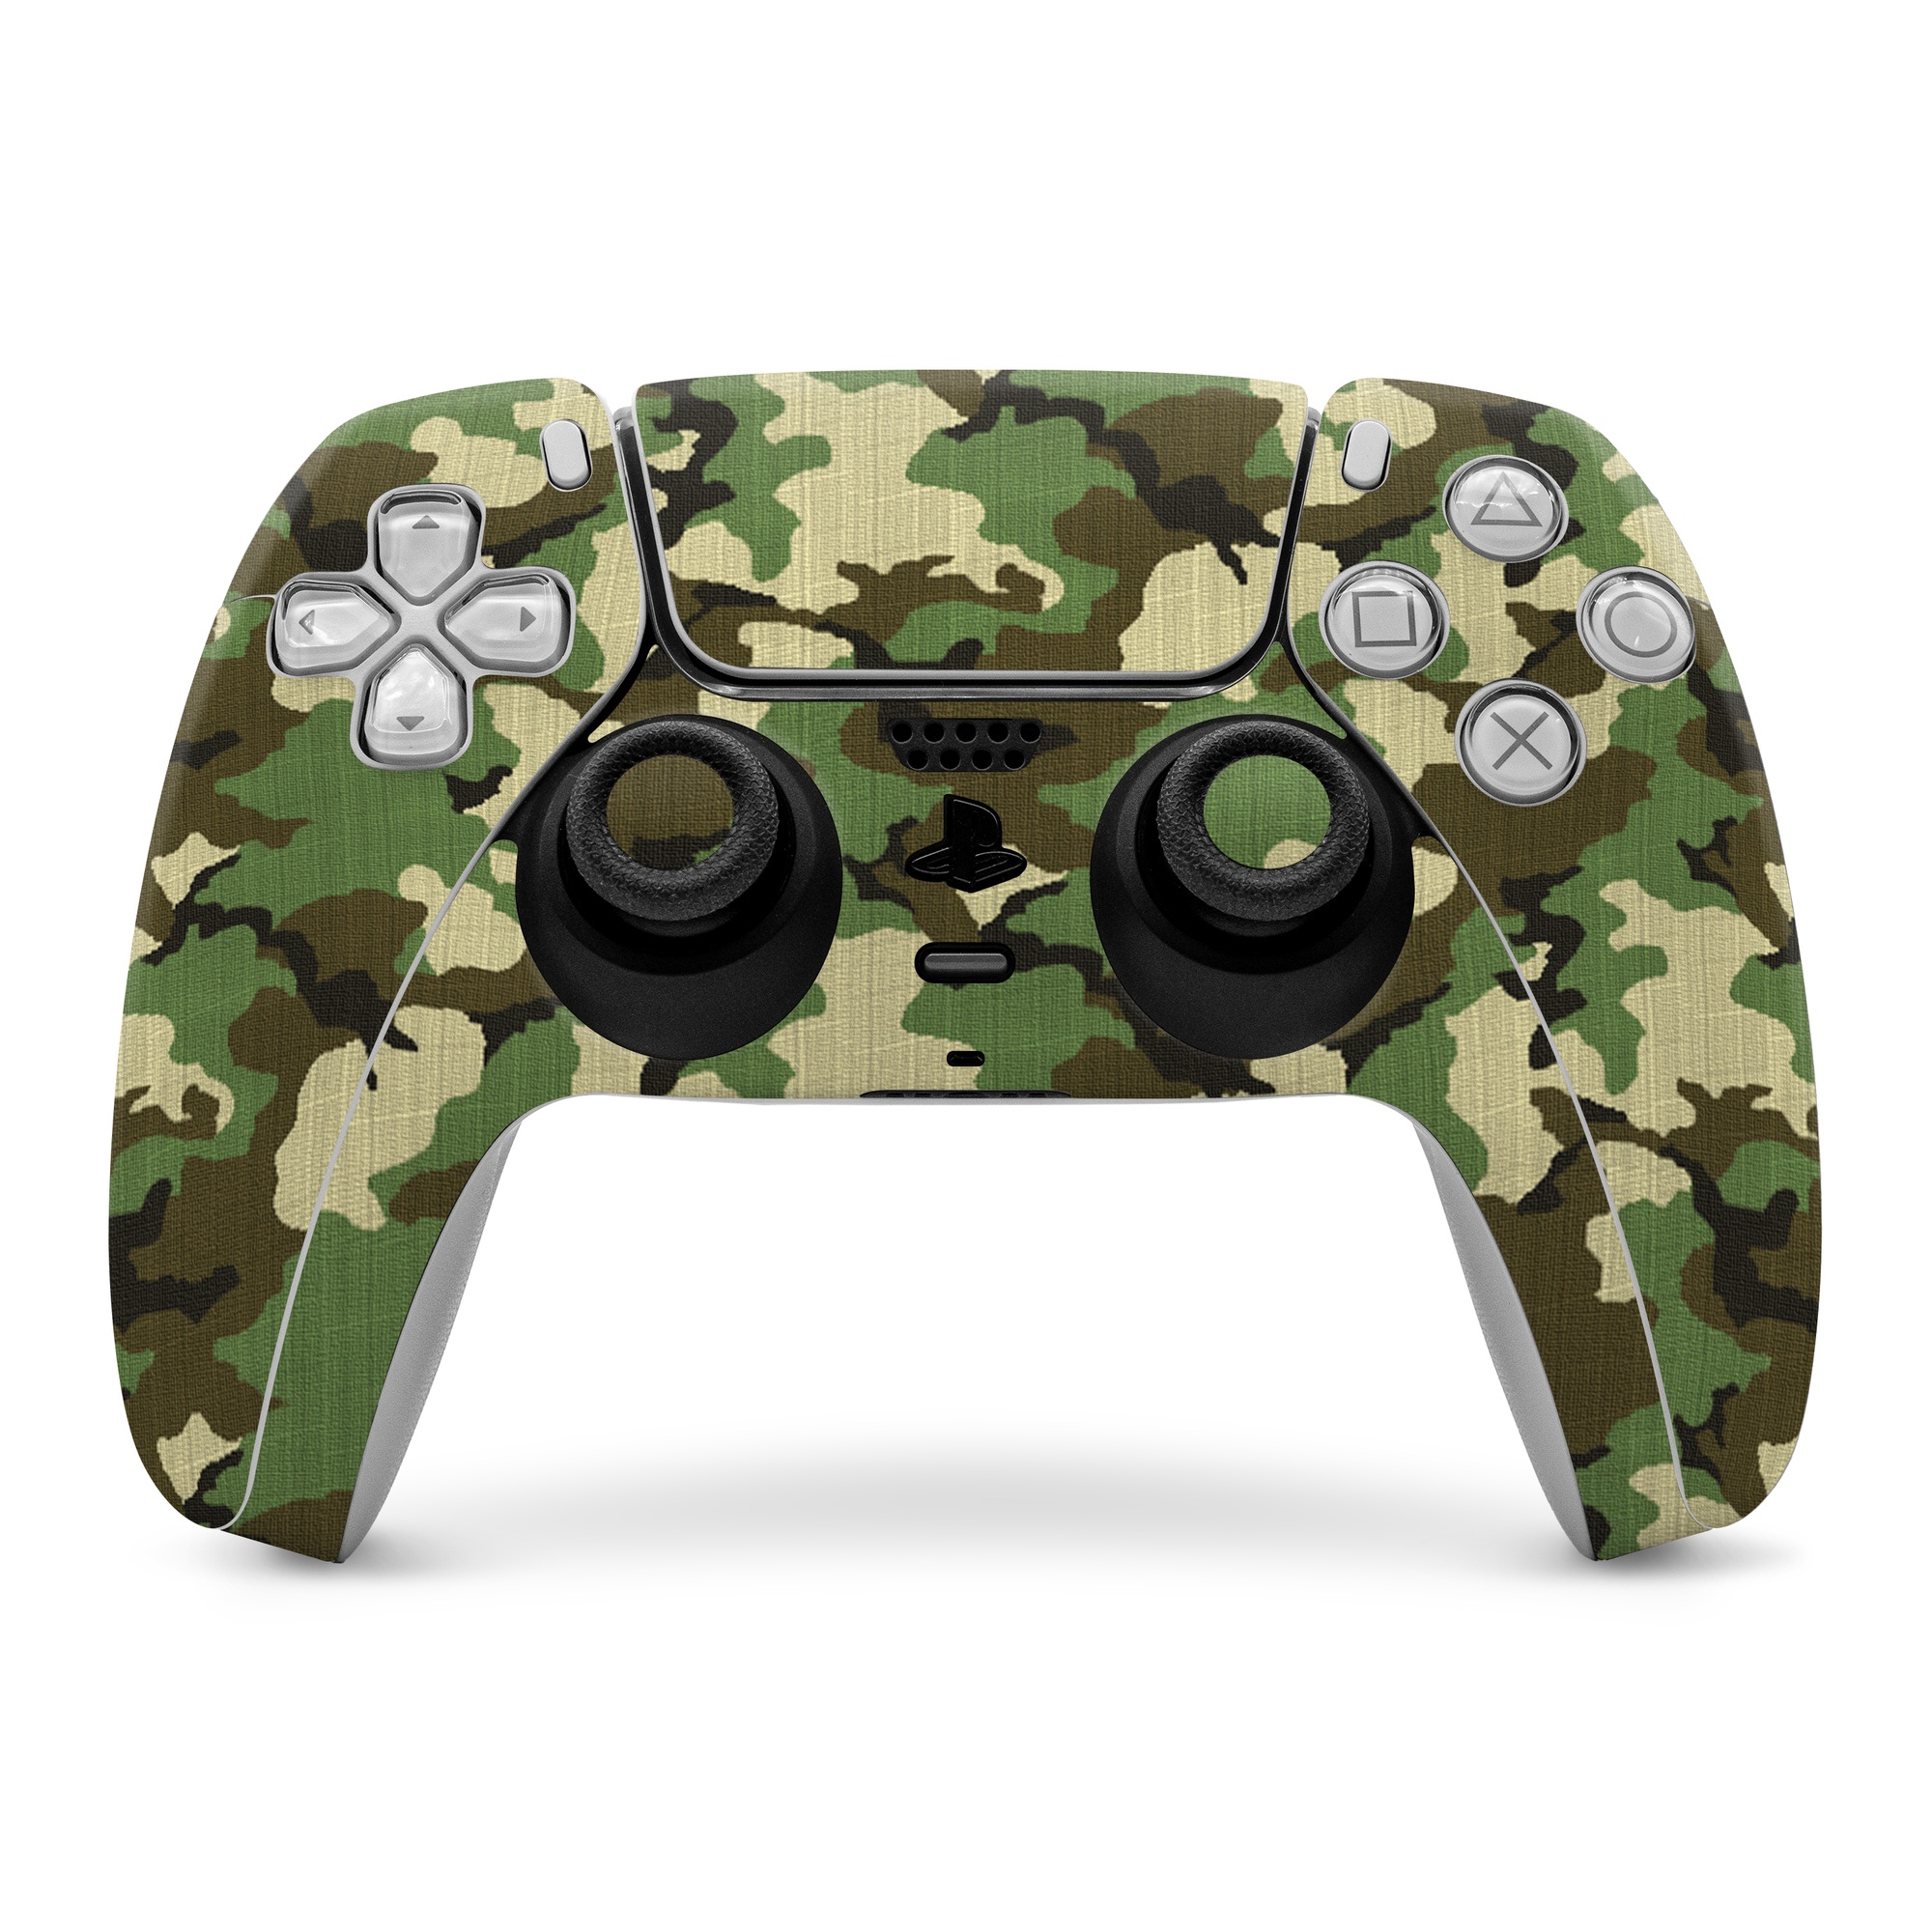 Sony PS5 Controller Skin - Woodland Camo (Image 1)